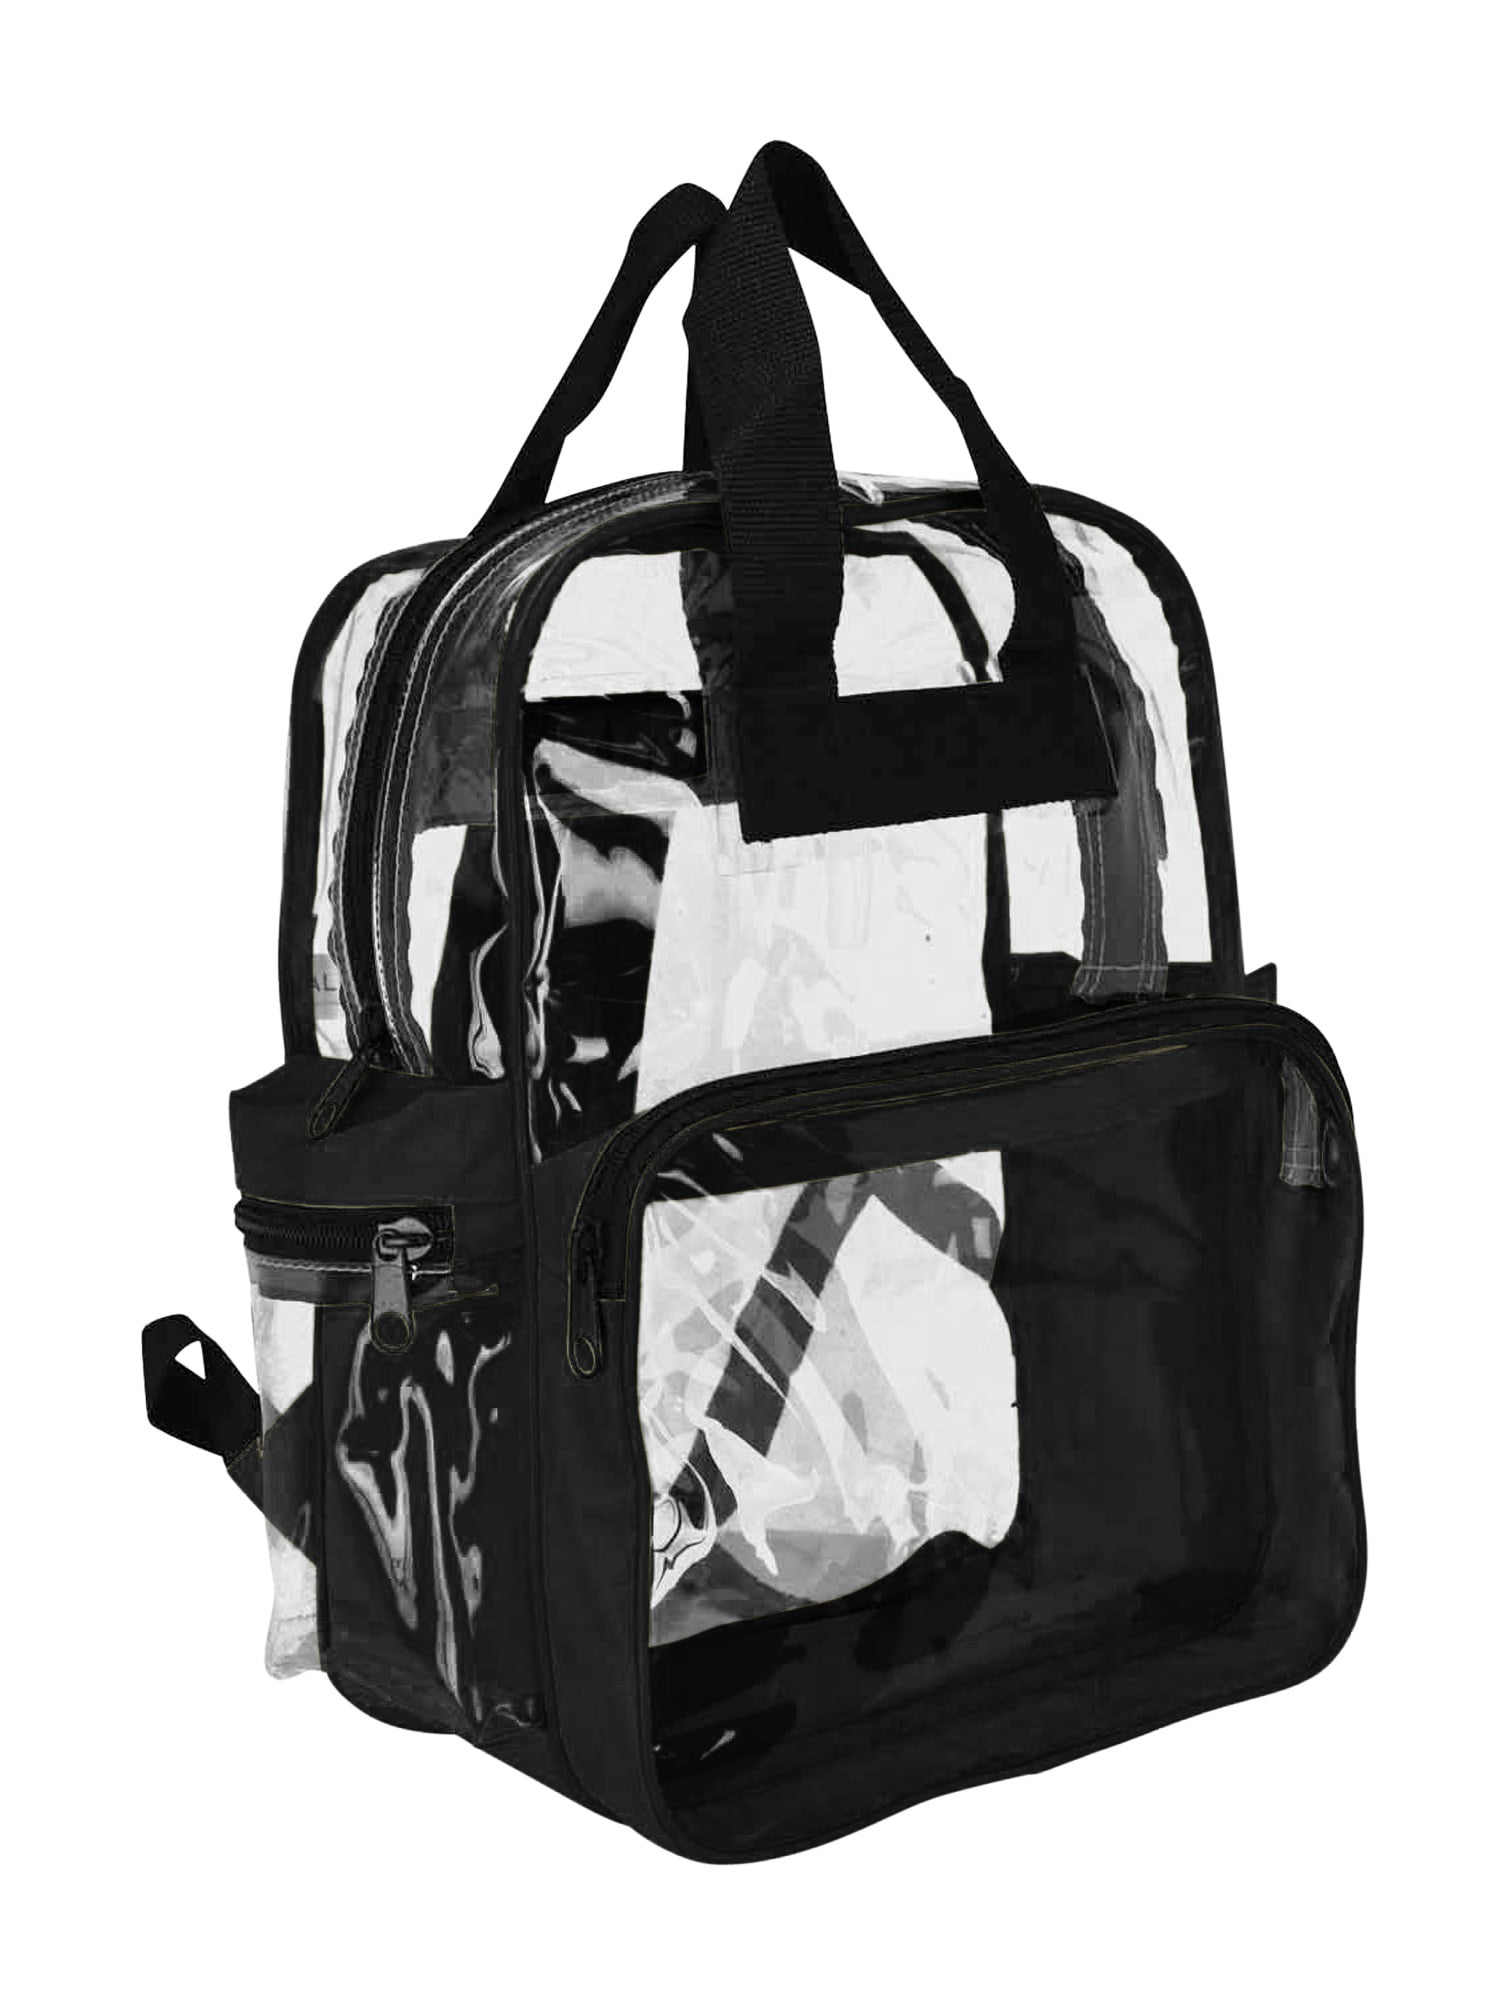 clear backpacks in store